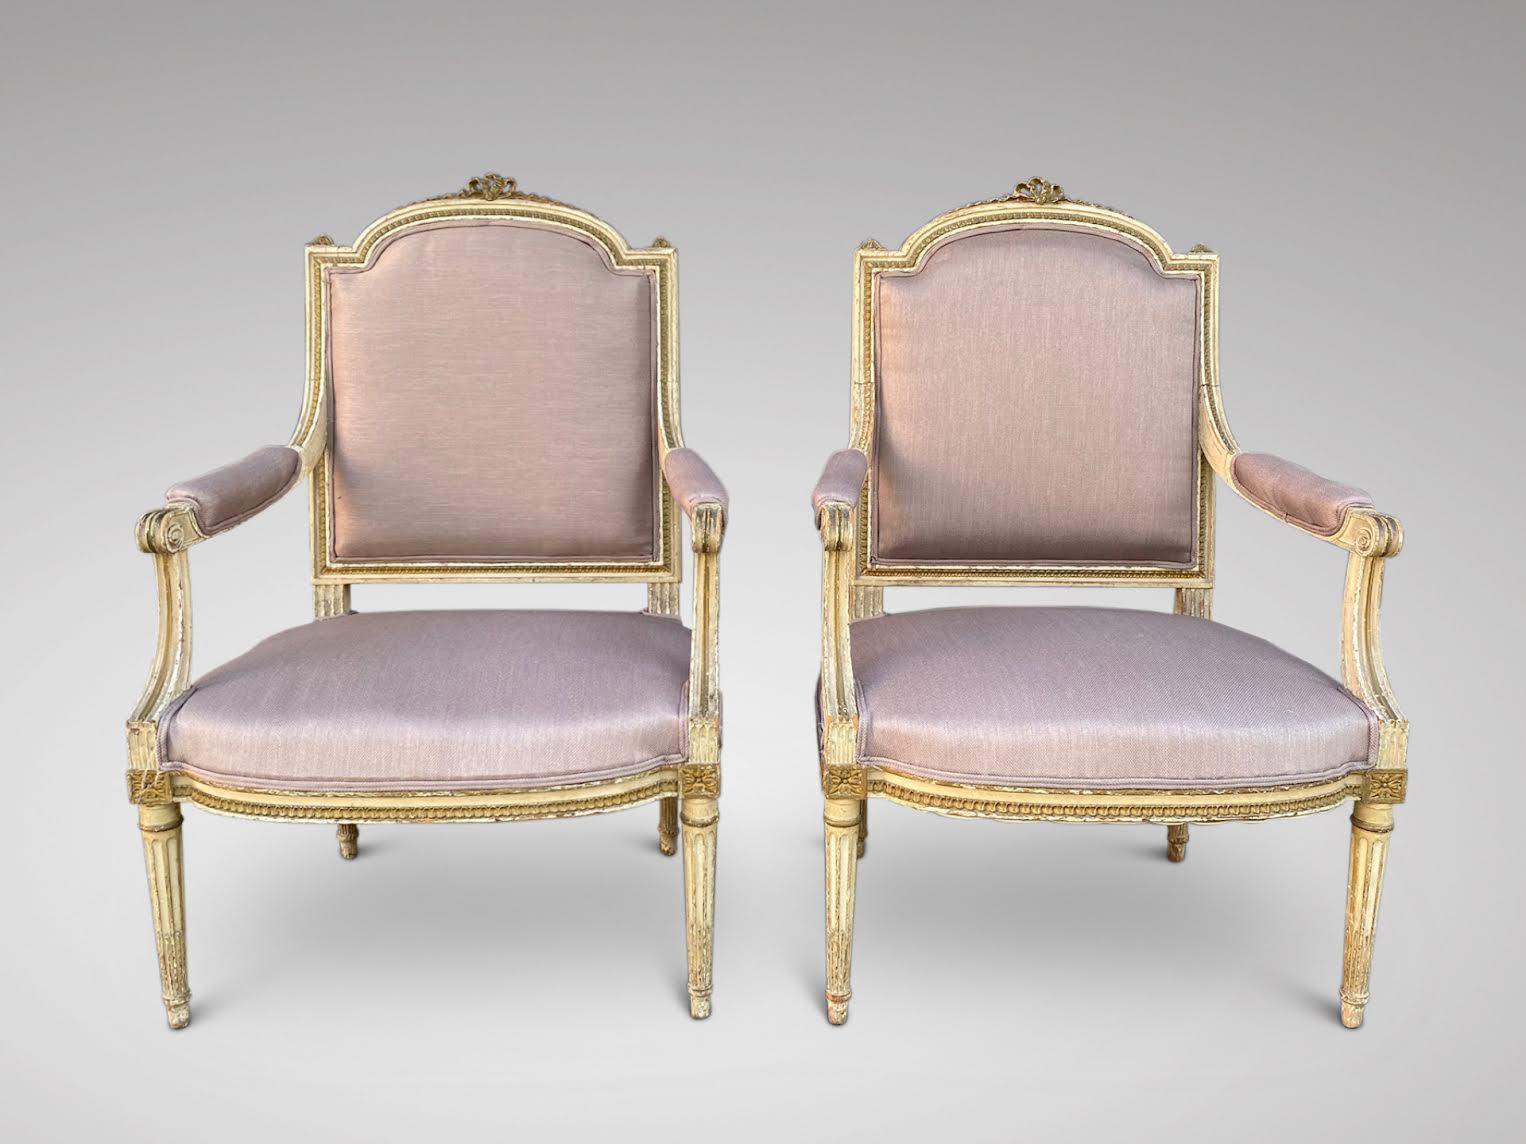 A stunning pair of Louis XVI Style, late 19th century painted, carved and reupholstered armchairs. Original cream coloured carved woodwork, original horse hair filling, hessian covering and newly reupholstered in a quality taupe colour fabric.
 
The